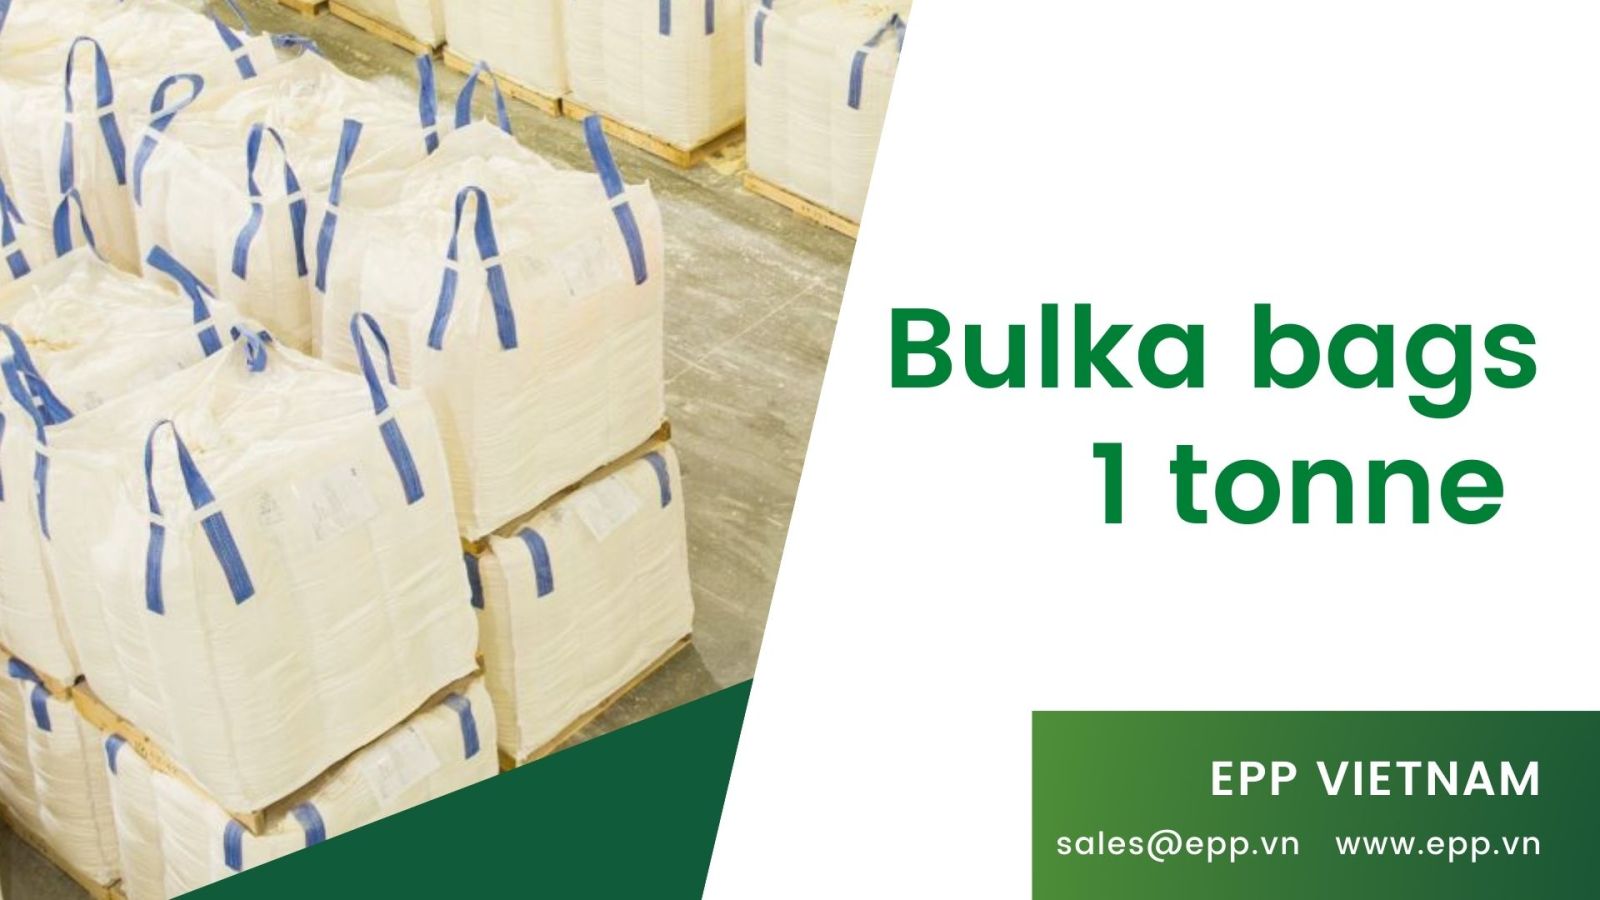 What-should-you-know-about-bulk-bag-1-tonne.jpg